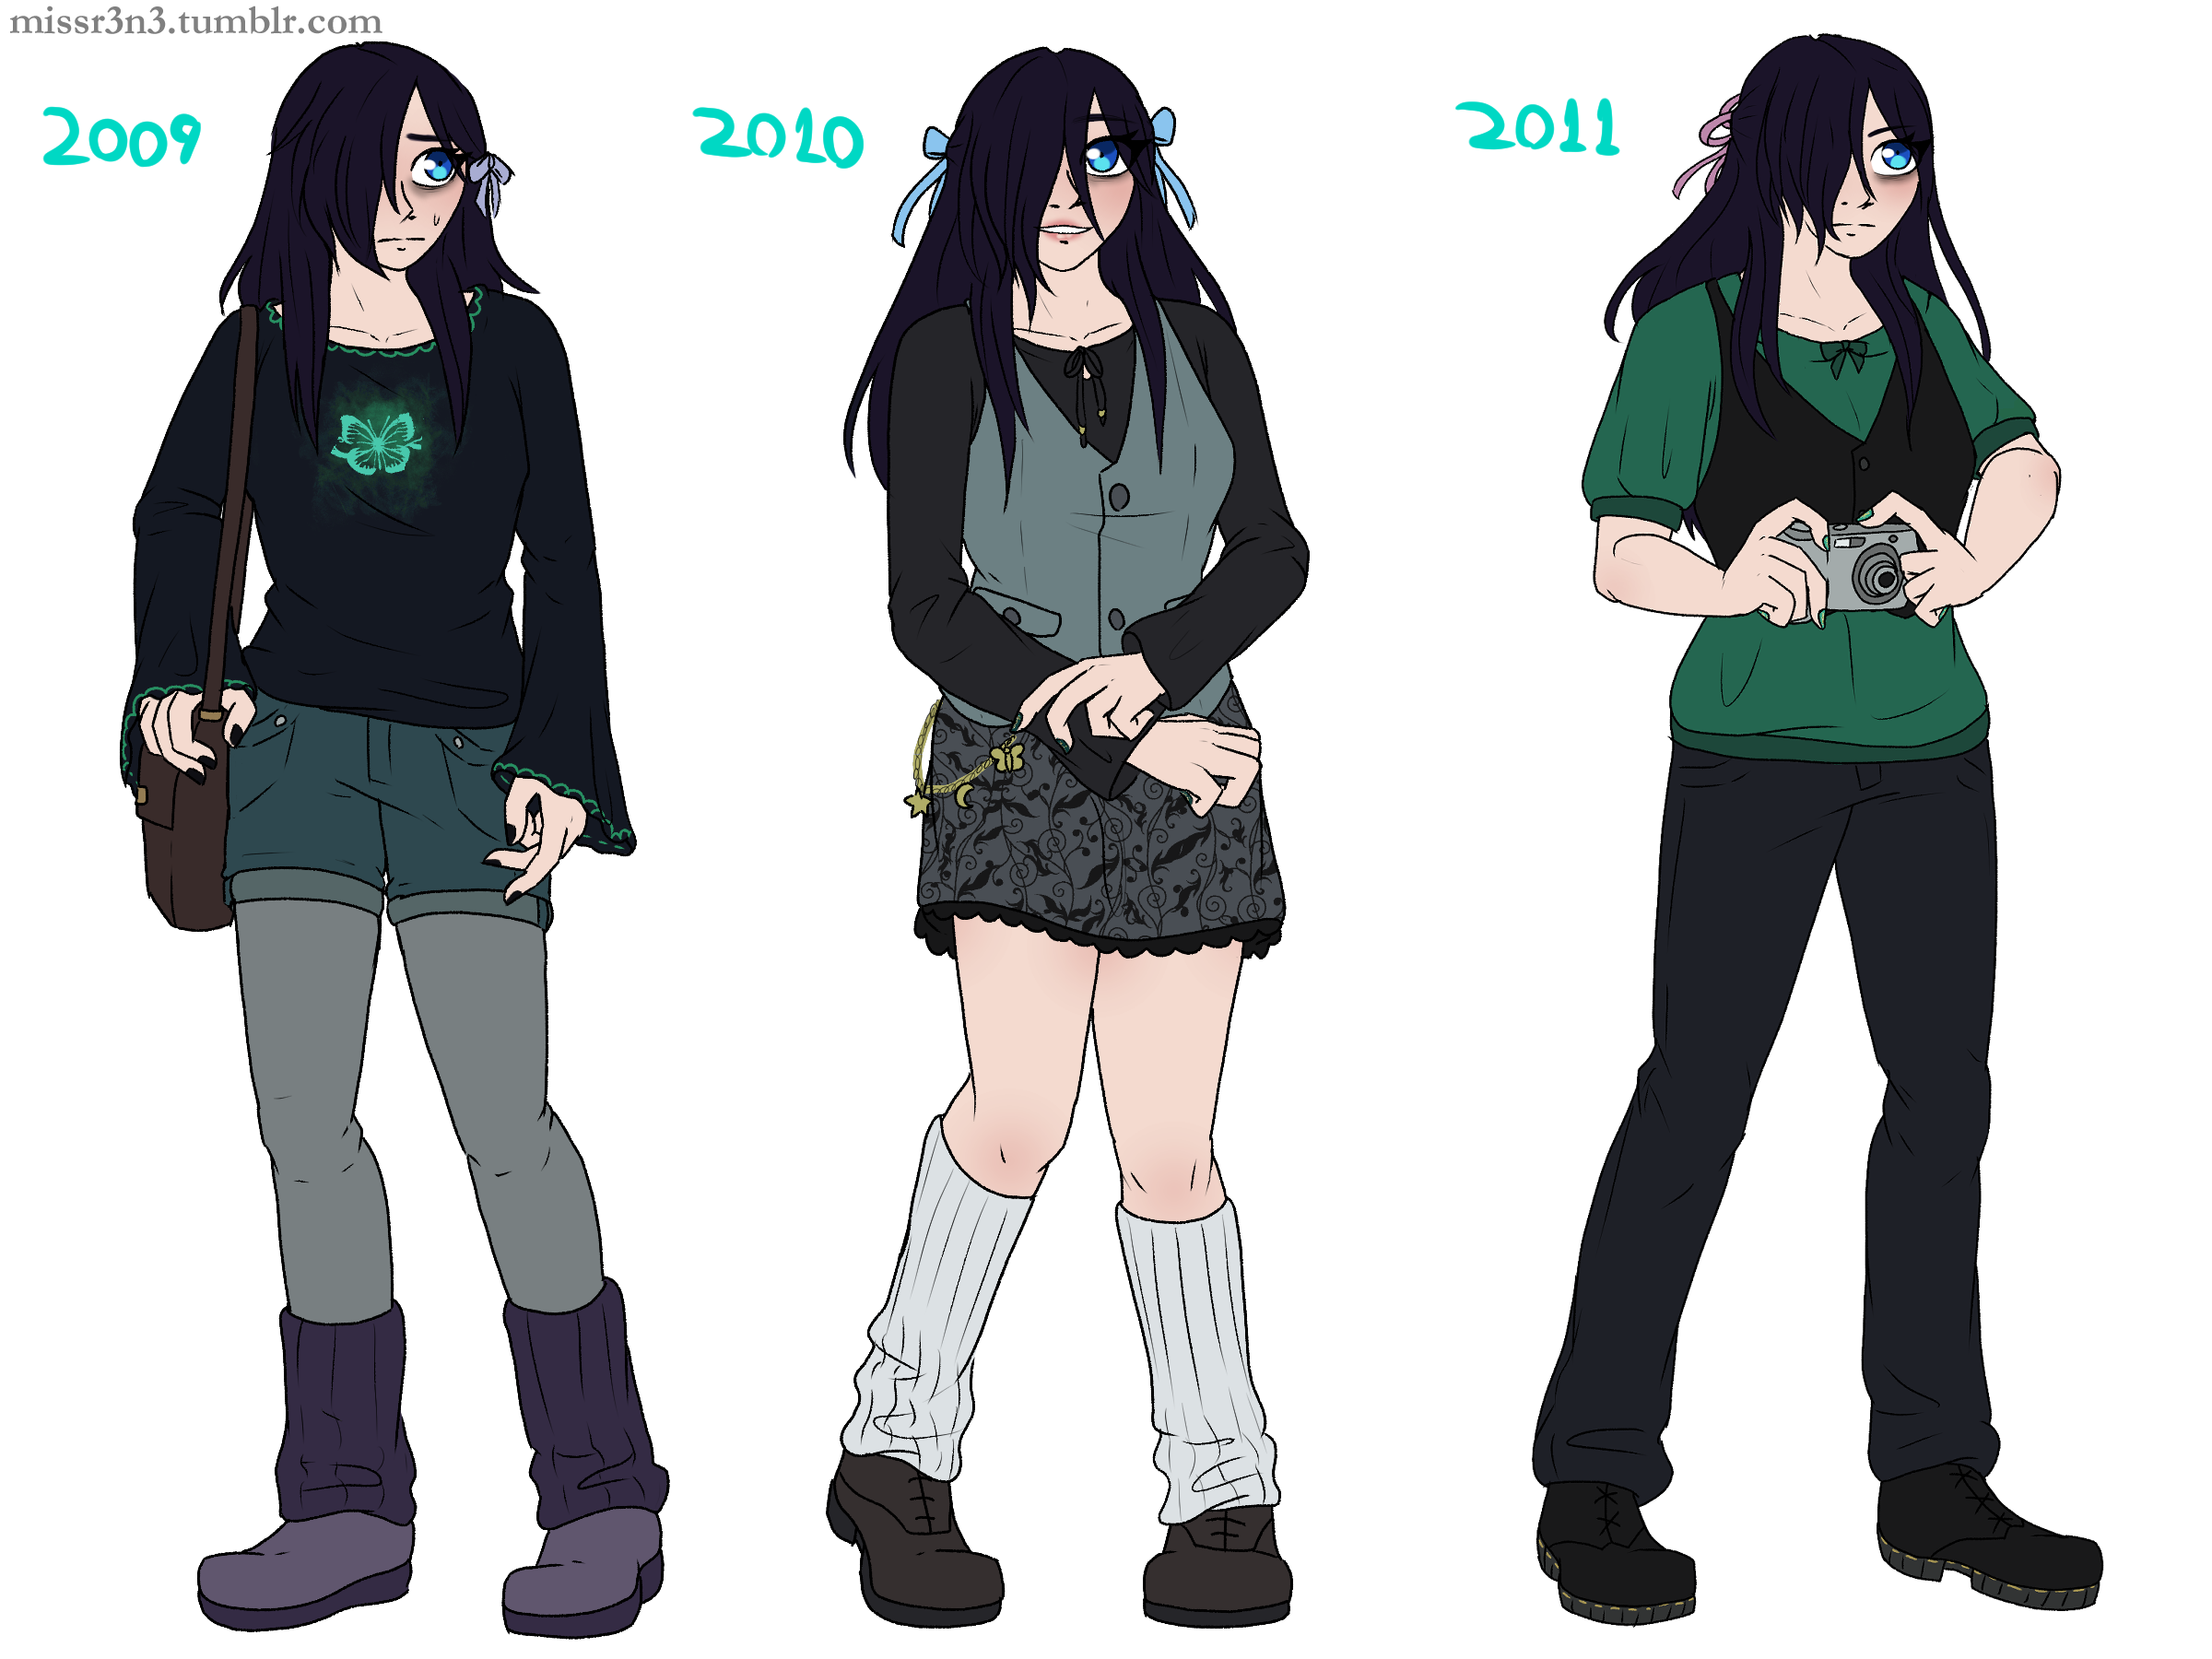 madeline wells' 2009, 2010, and 2011 designs